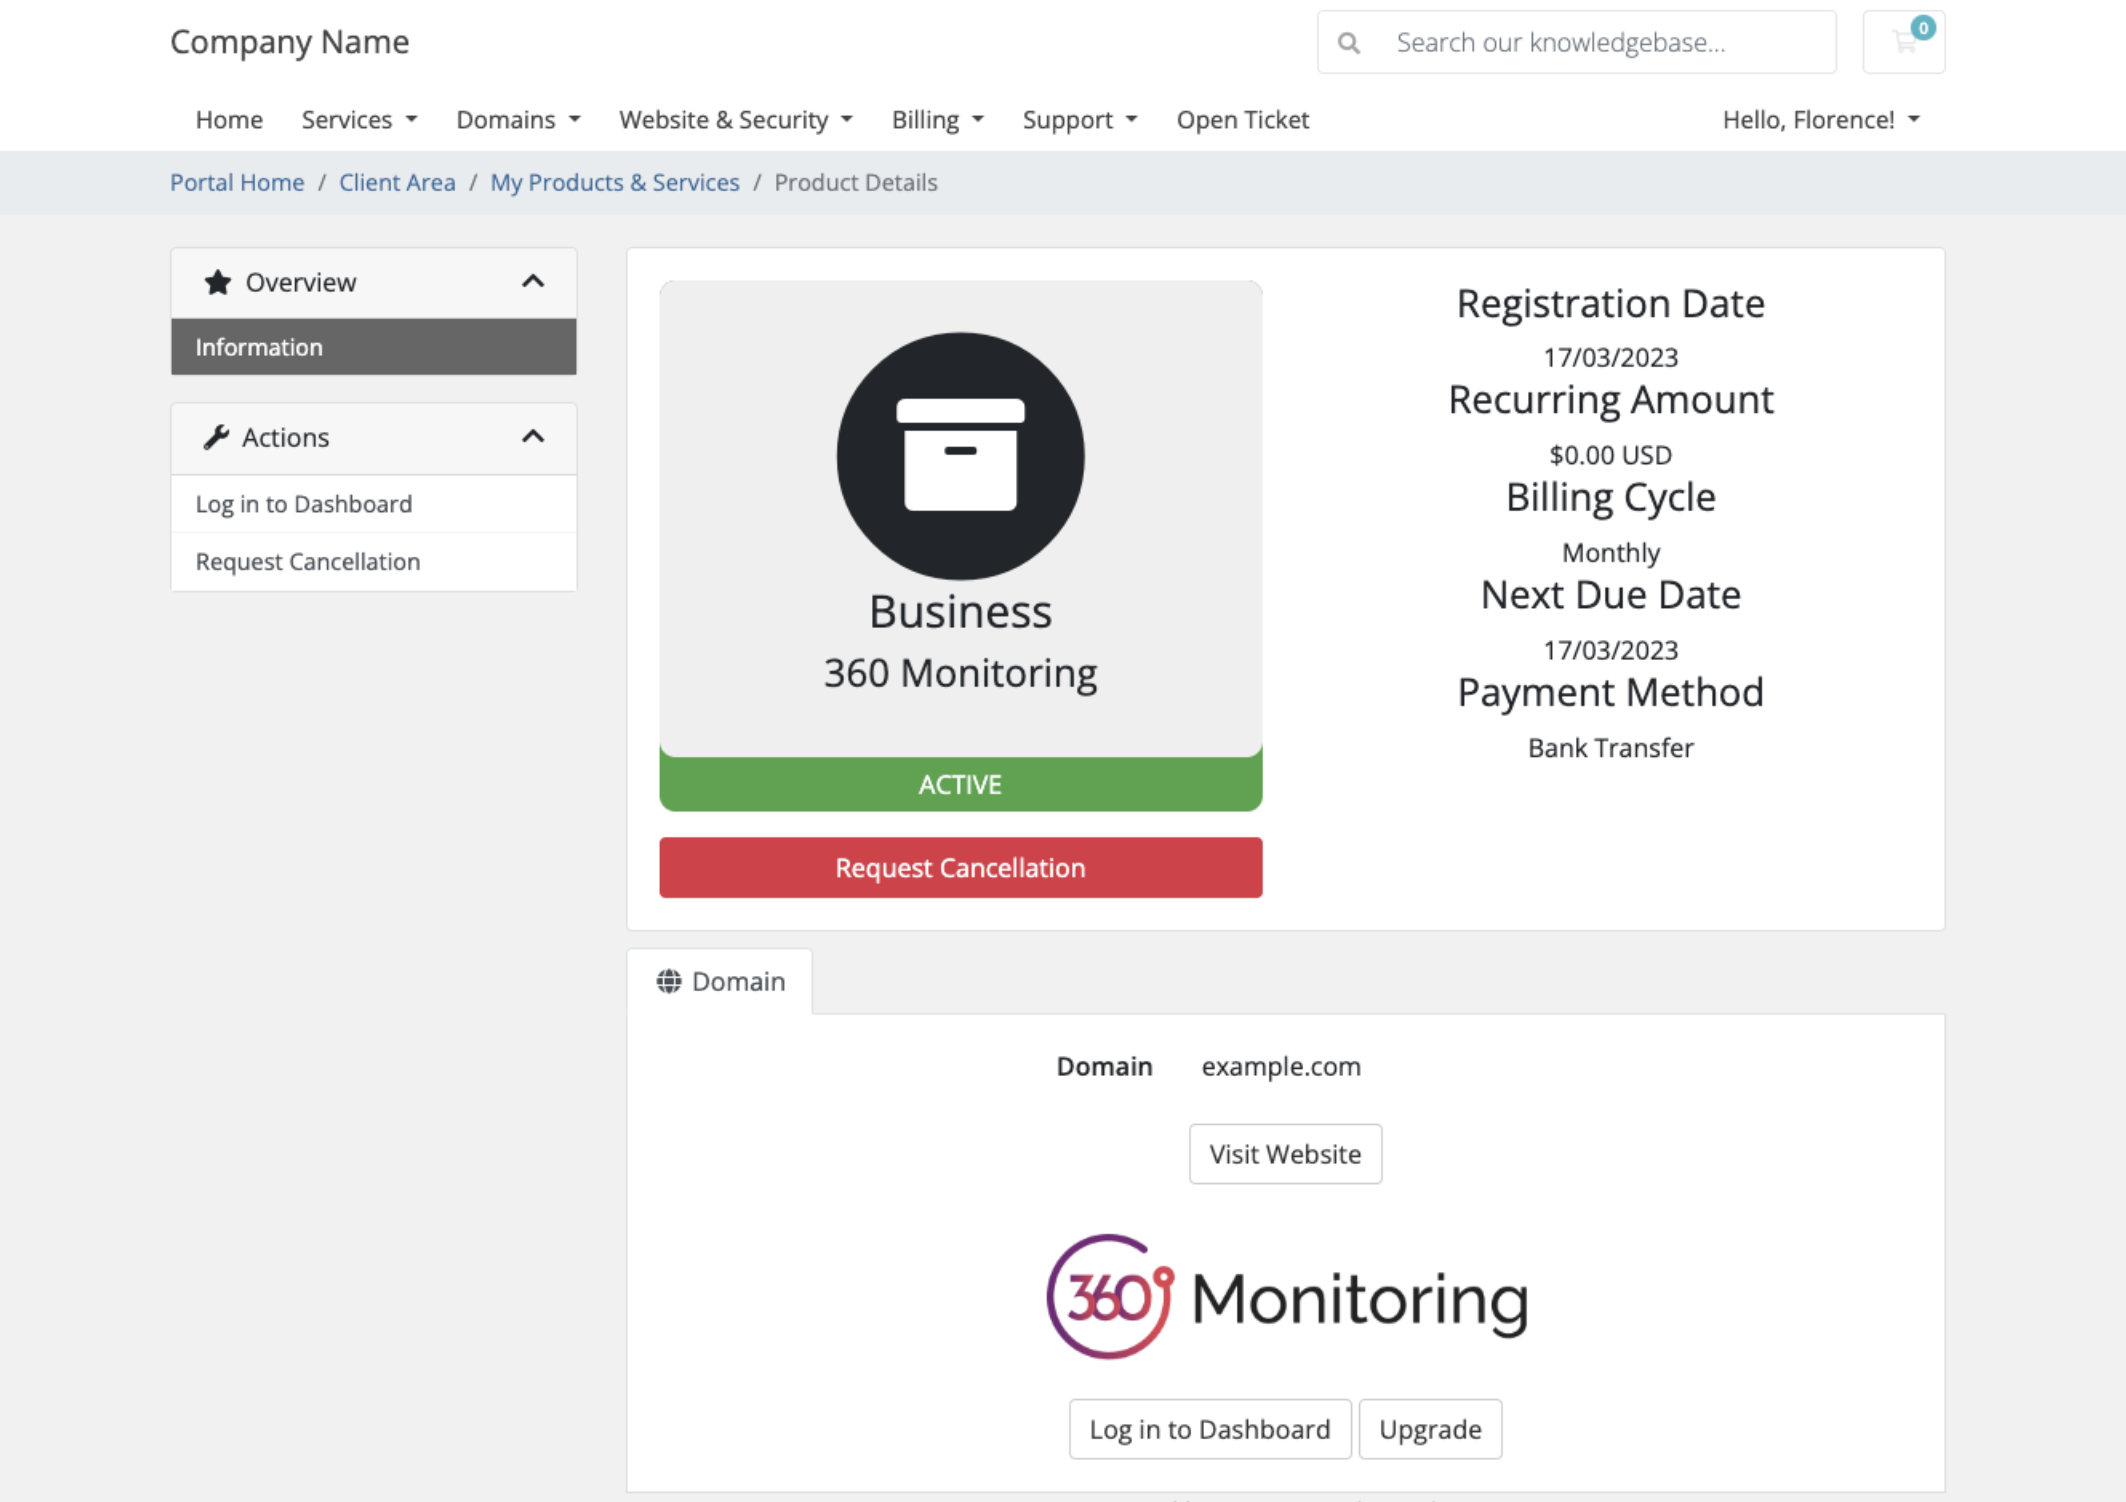 360 Monitoring actions in the Client Area